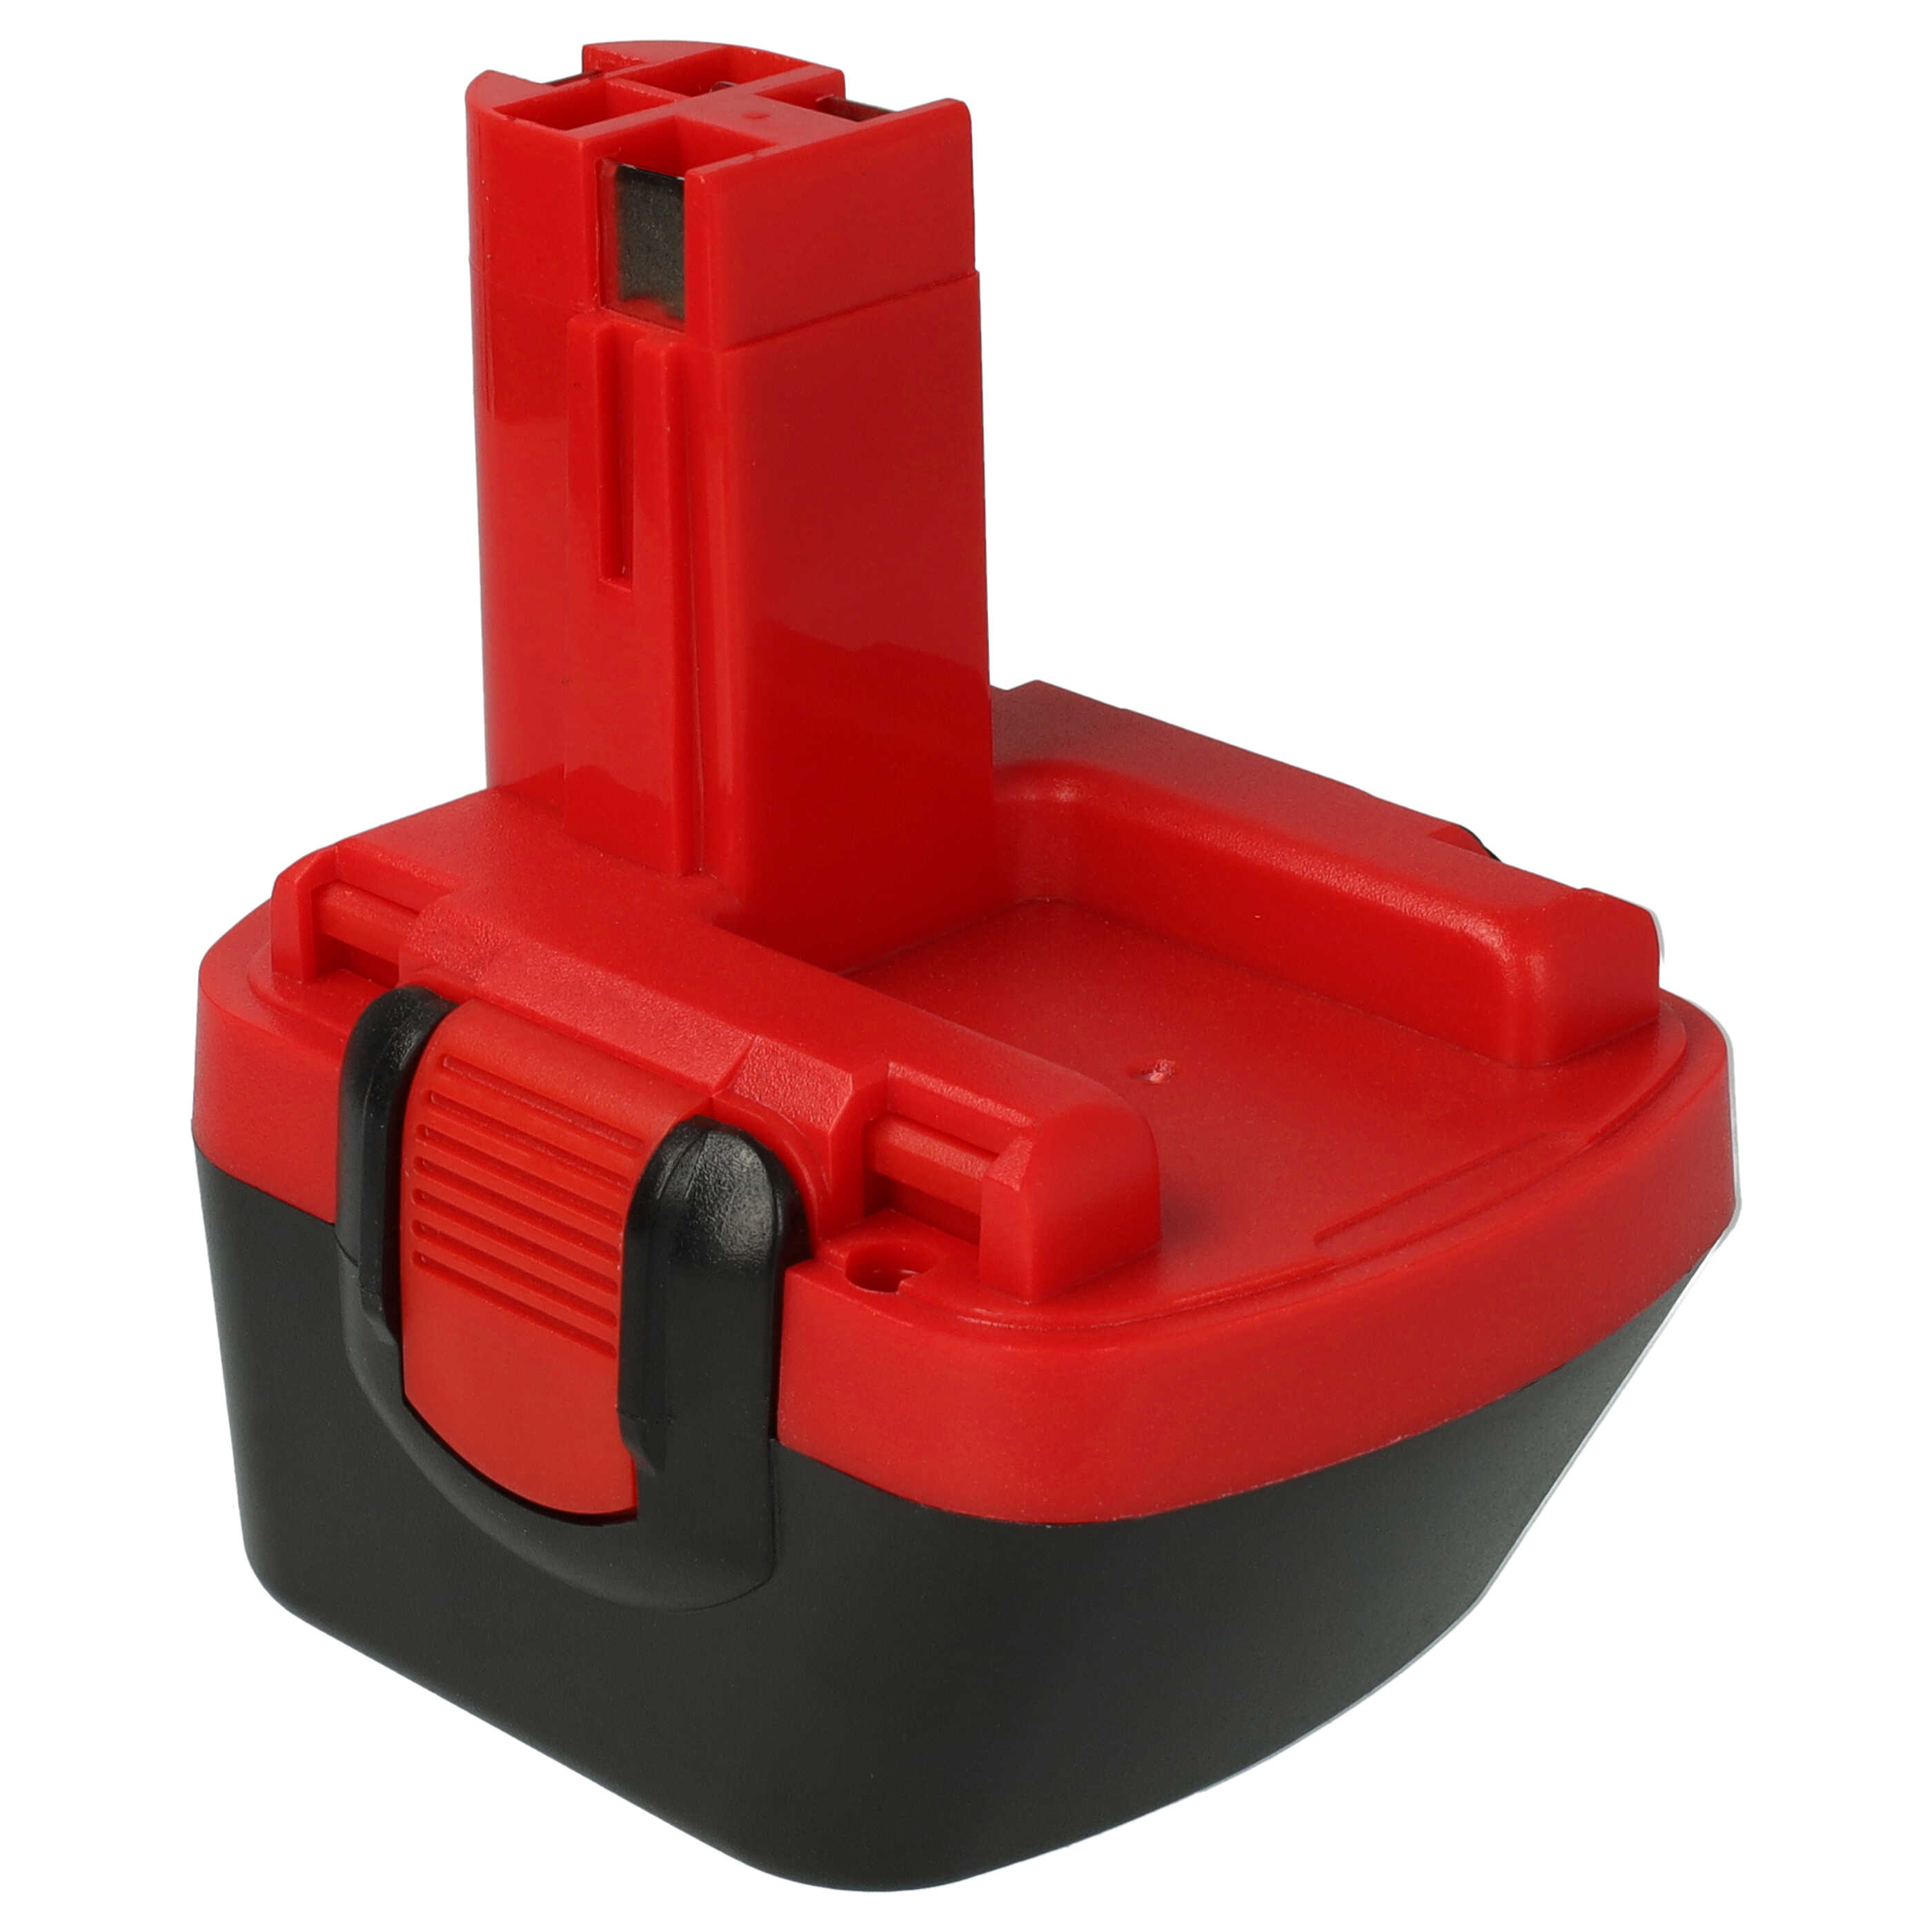 Electric Power Tool Battery Replaces Bosch 2 607 335 261, 2 607 335 262, 2 60 7335 249 - 3000 mAh, 12 V, NiMH